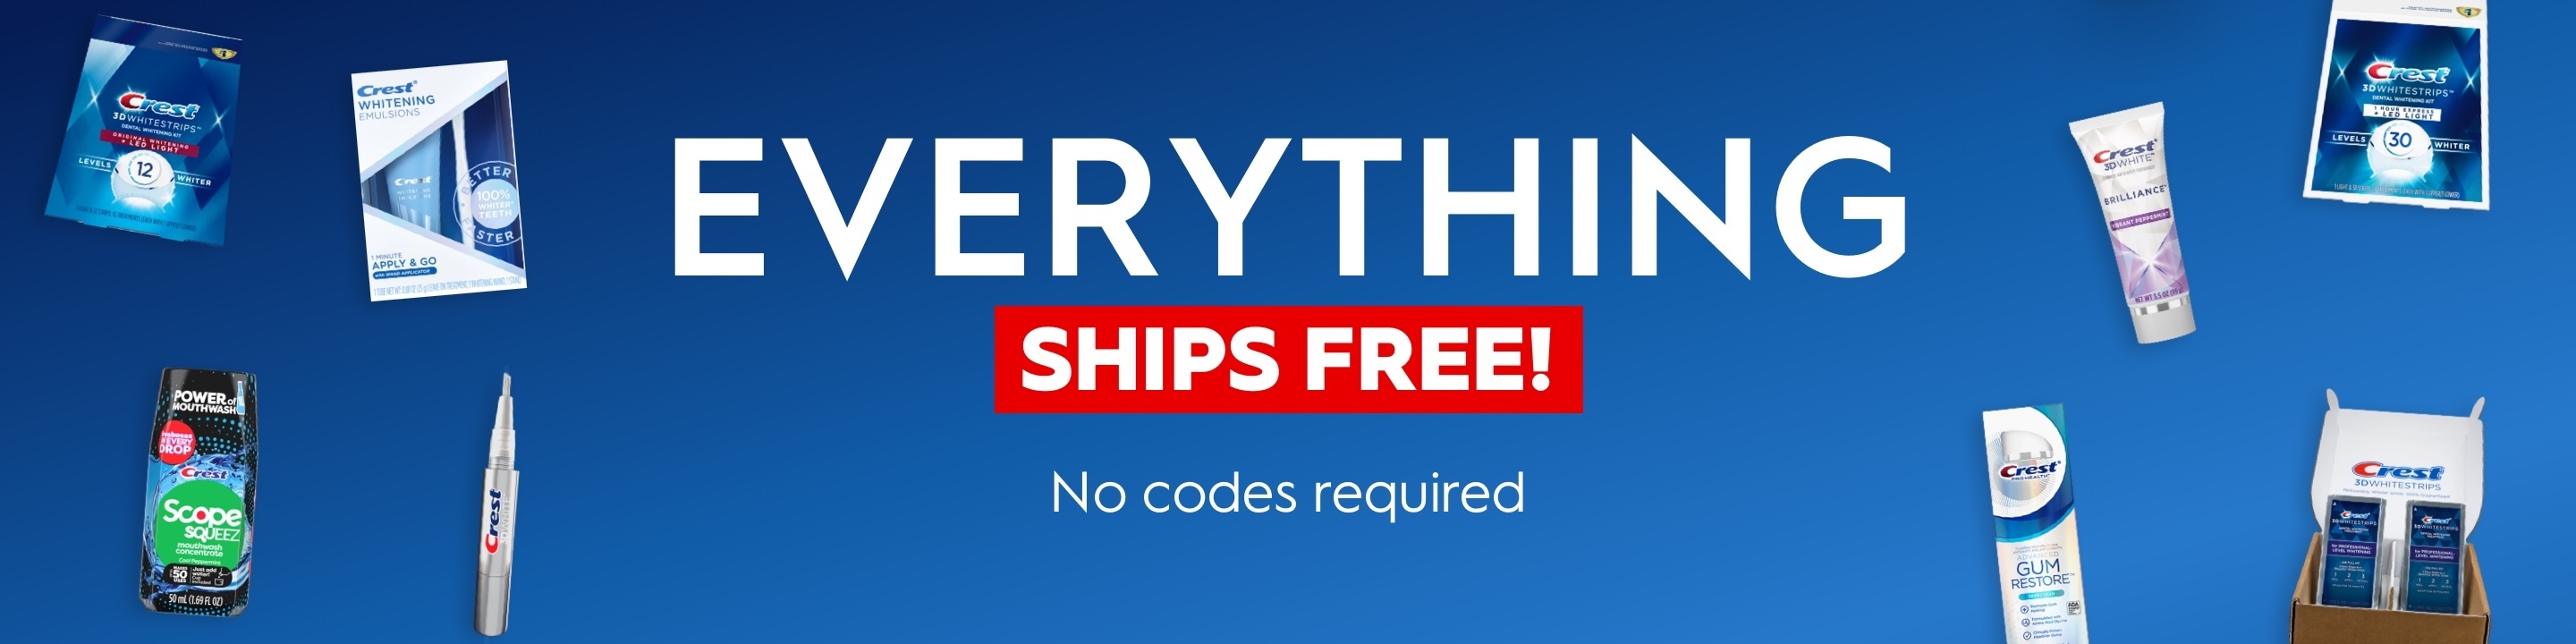 Everything Ships Free! No codes required.